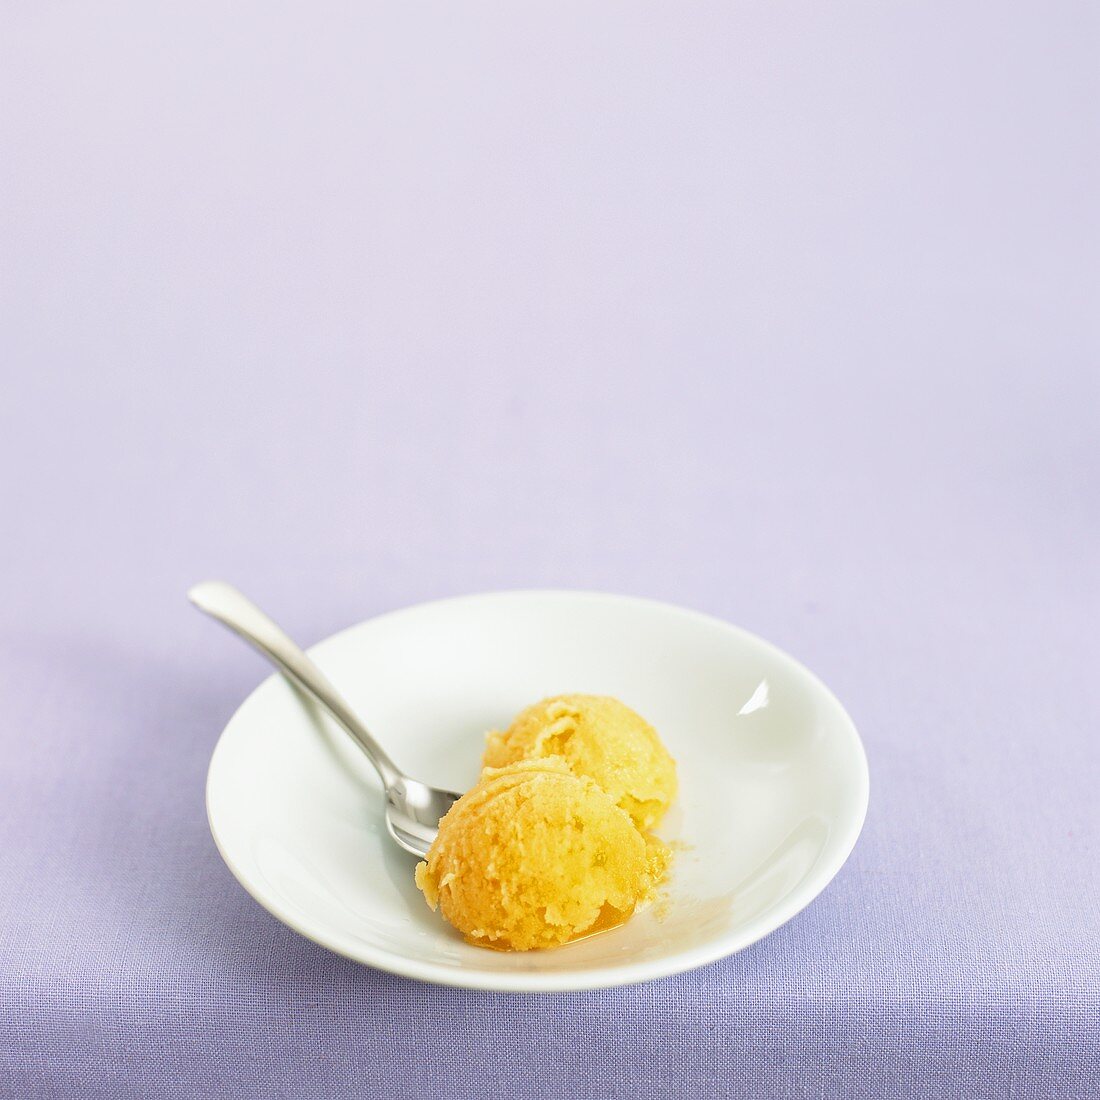 Two scoops of orange sorbet on a plate